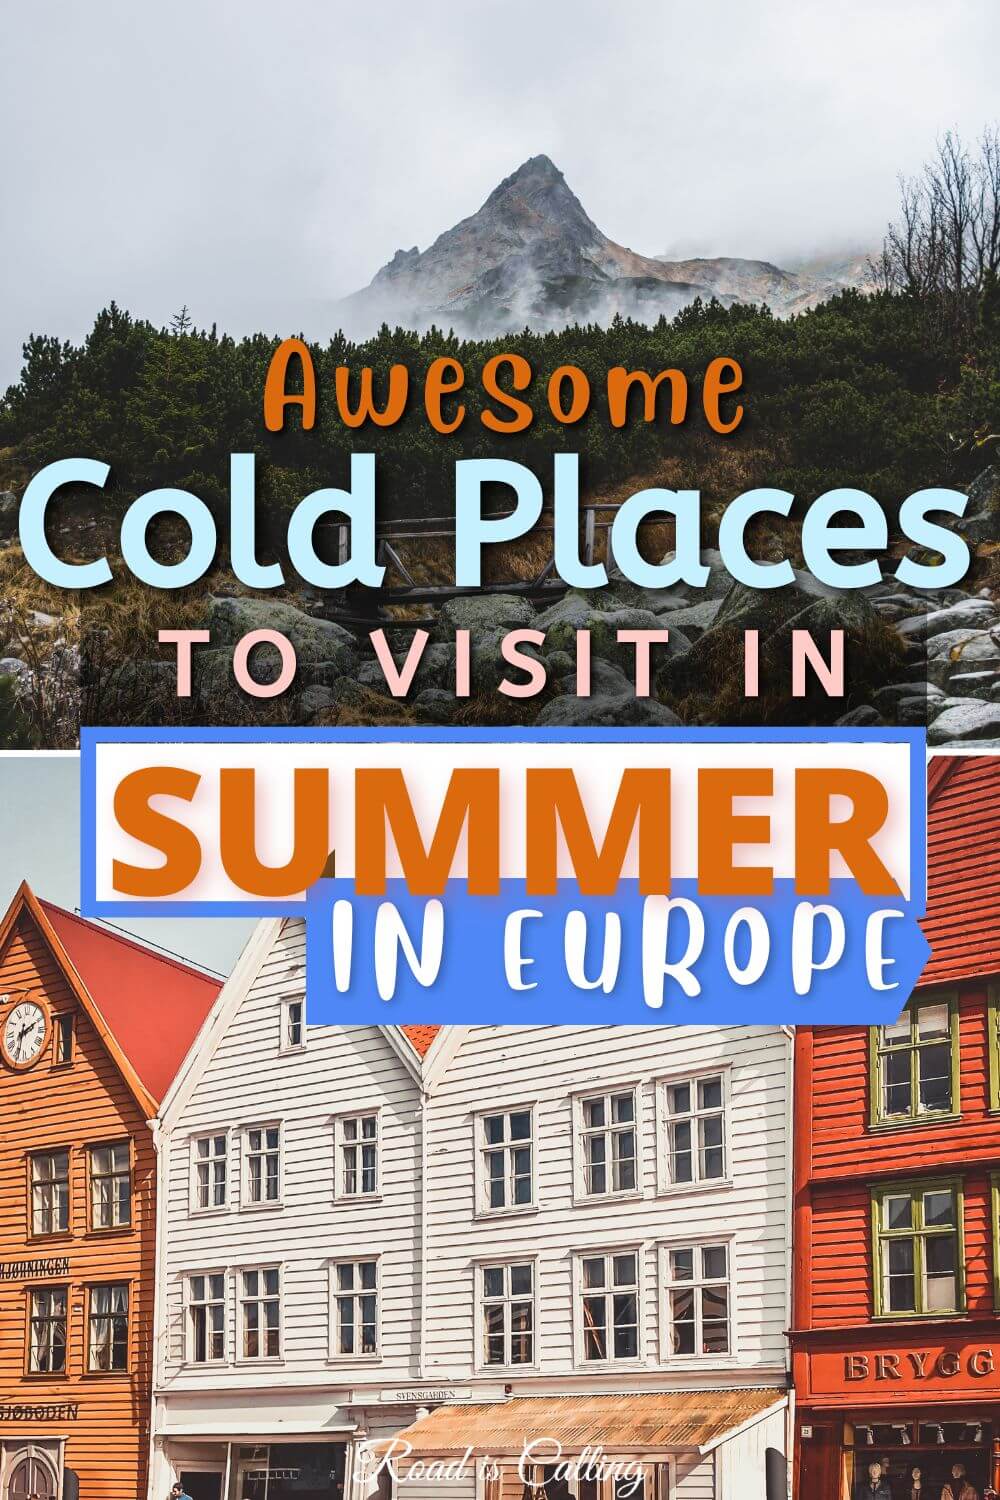 Cold places to visit in Summer